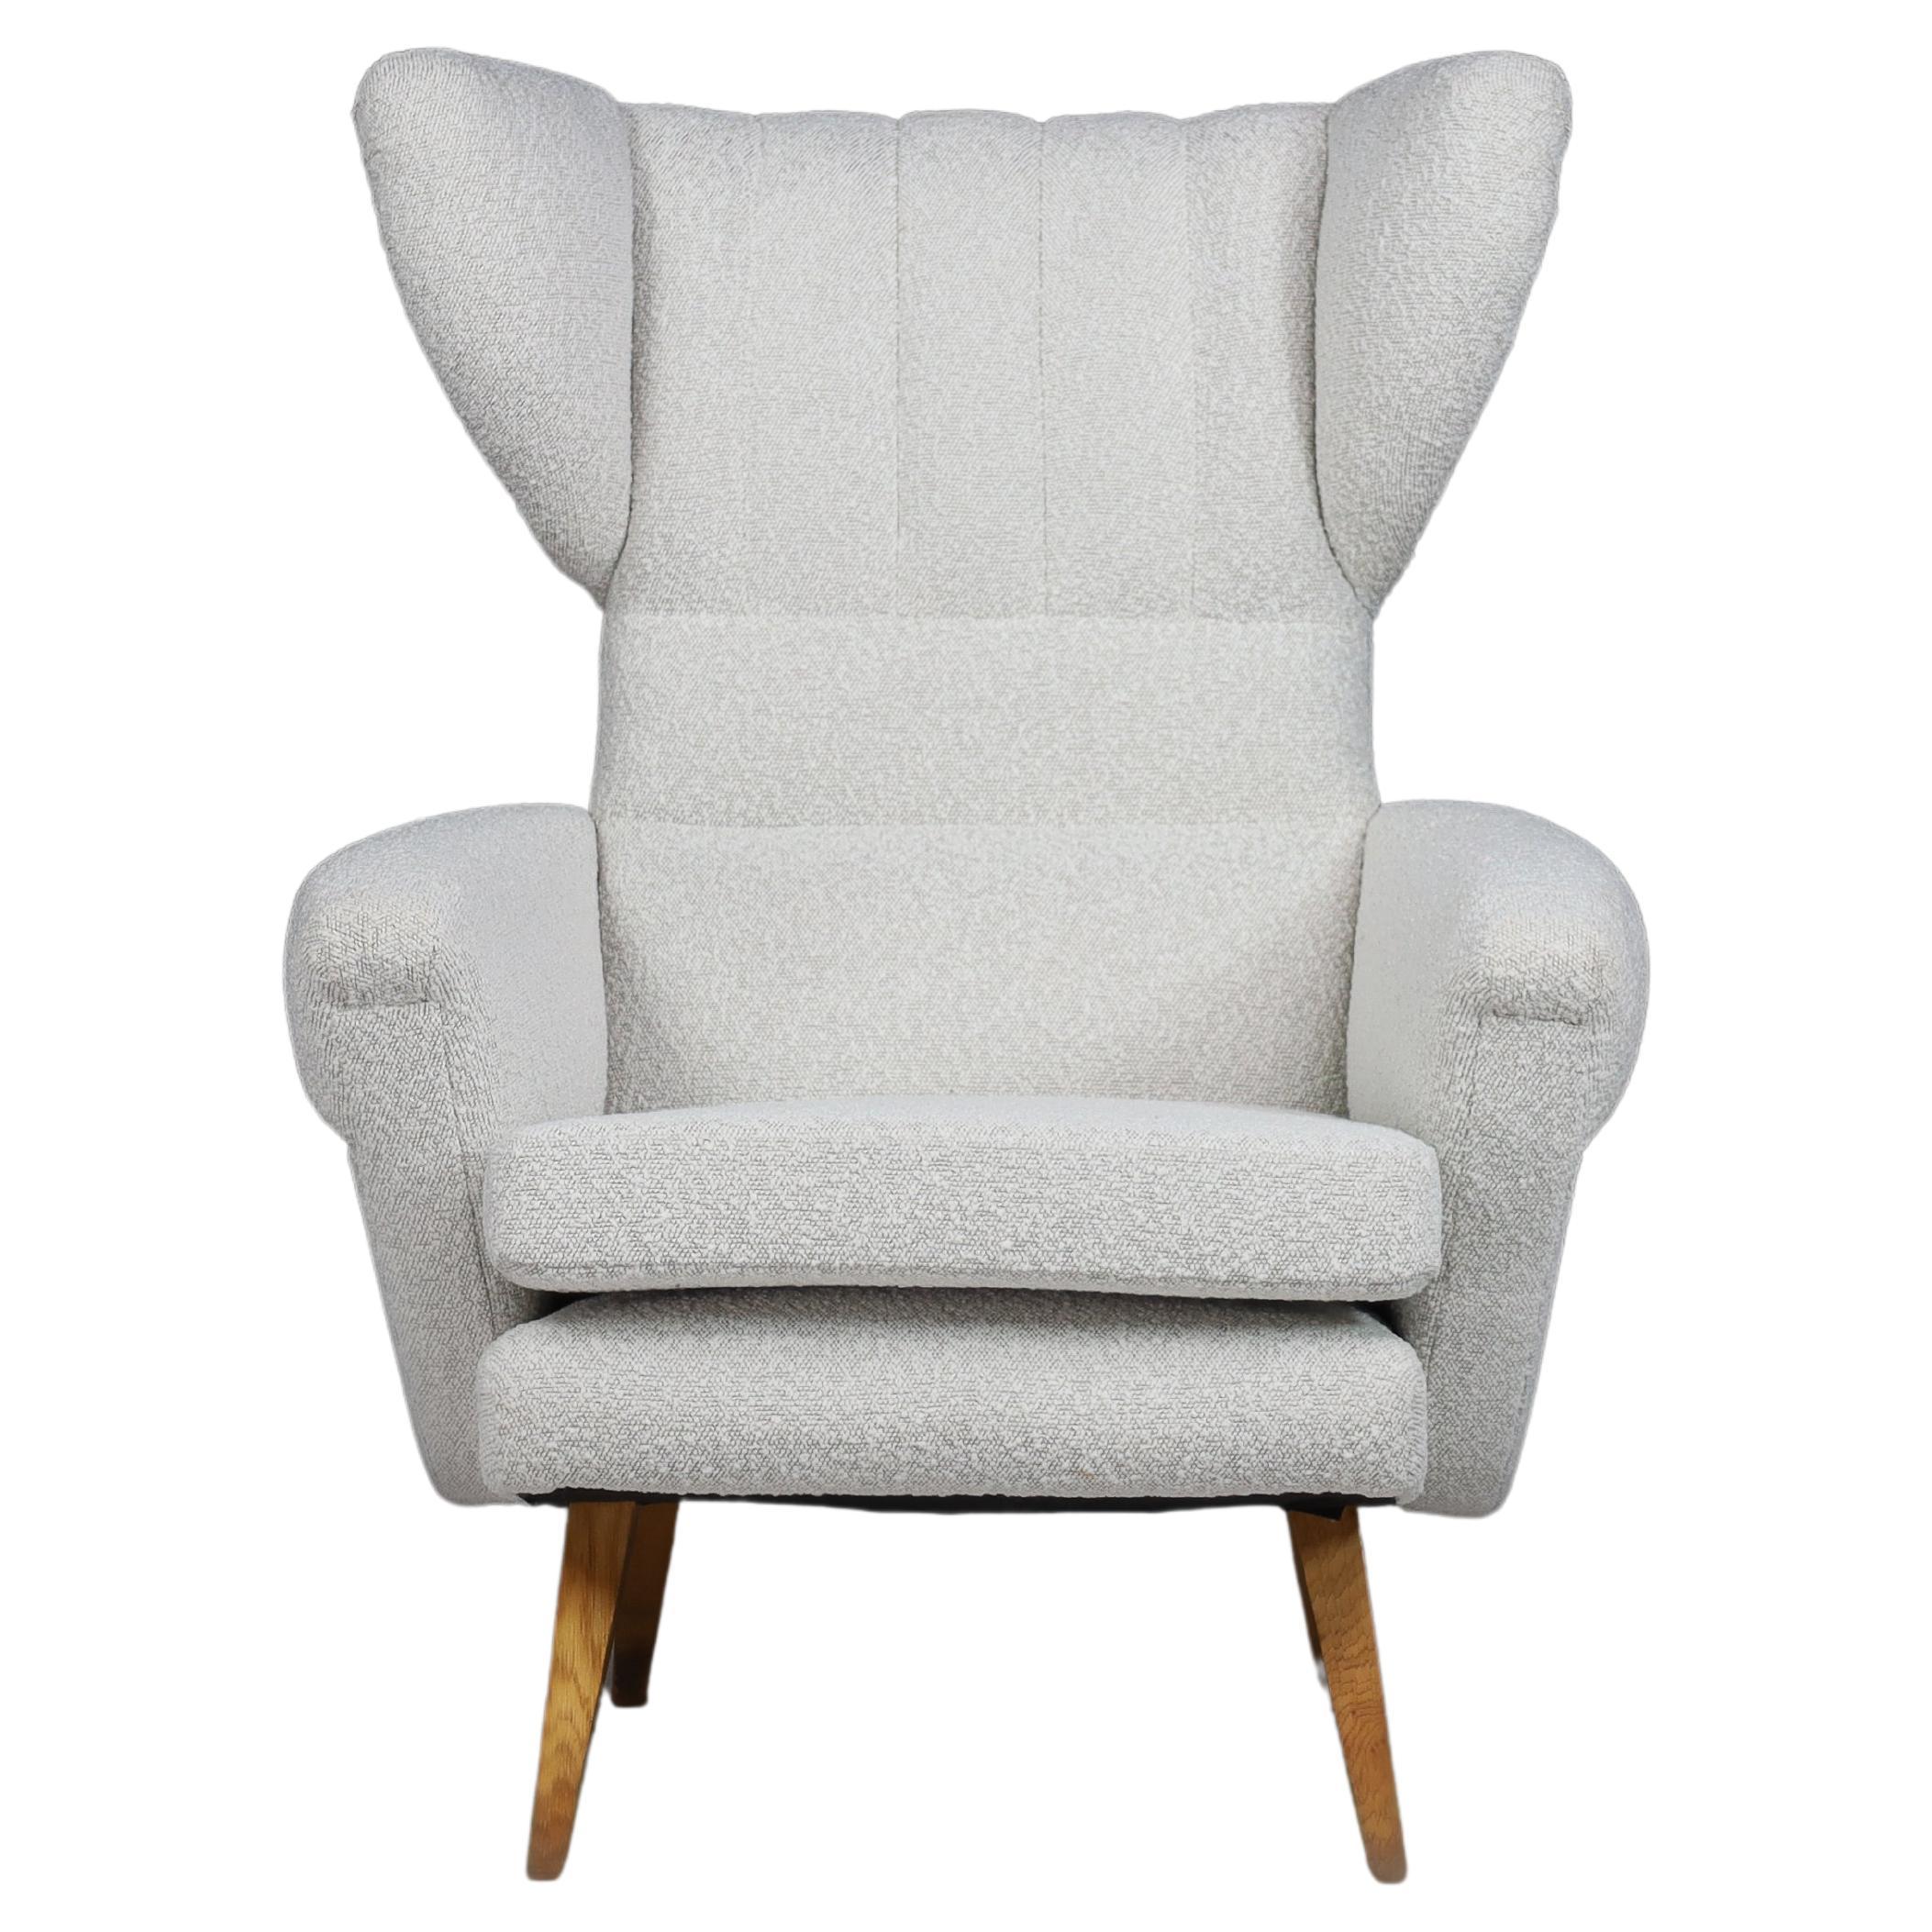 Wing Back Lounge chair in Reupholstered Bouclé Fabric, Praque 1950s

Large midcentury wingback armchair in re-upholstered bouclé fabric, Czech republic 1950s. This armchair would be an eye-catching addition to any interior, such as a living room,